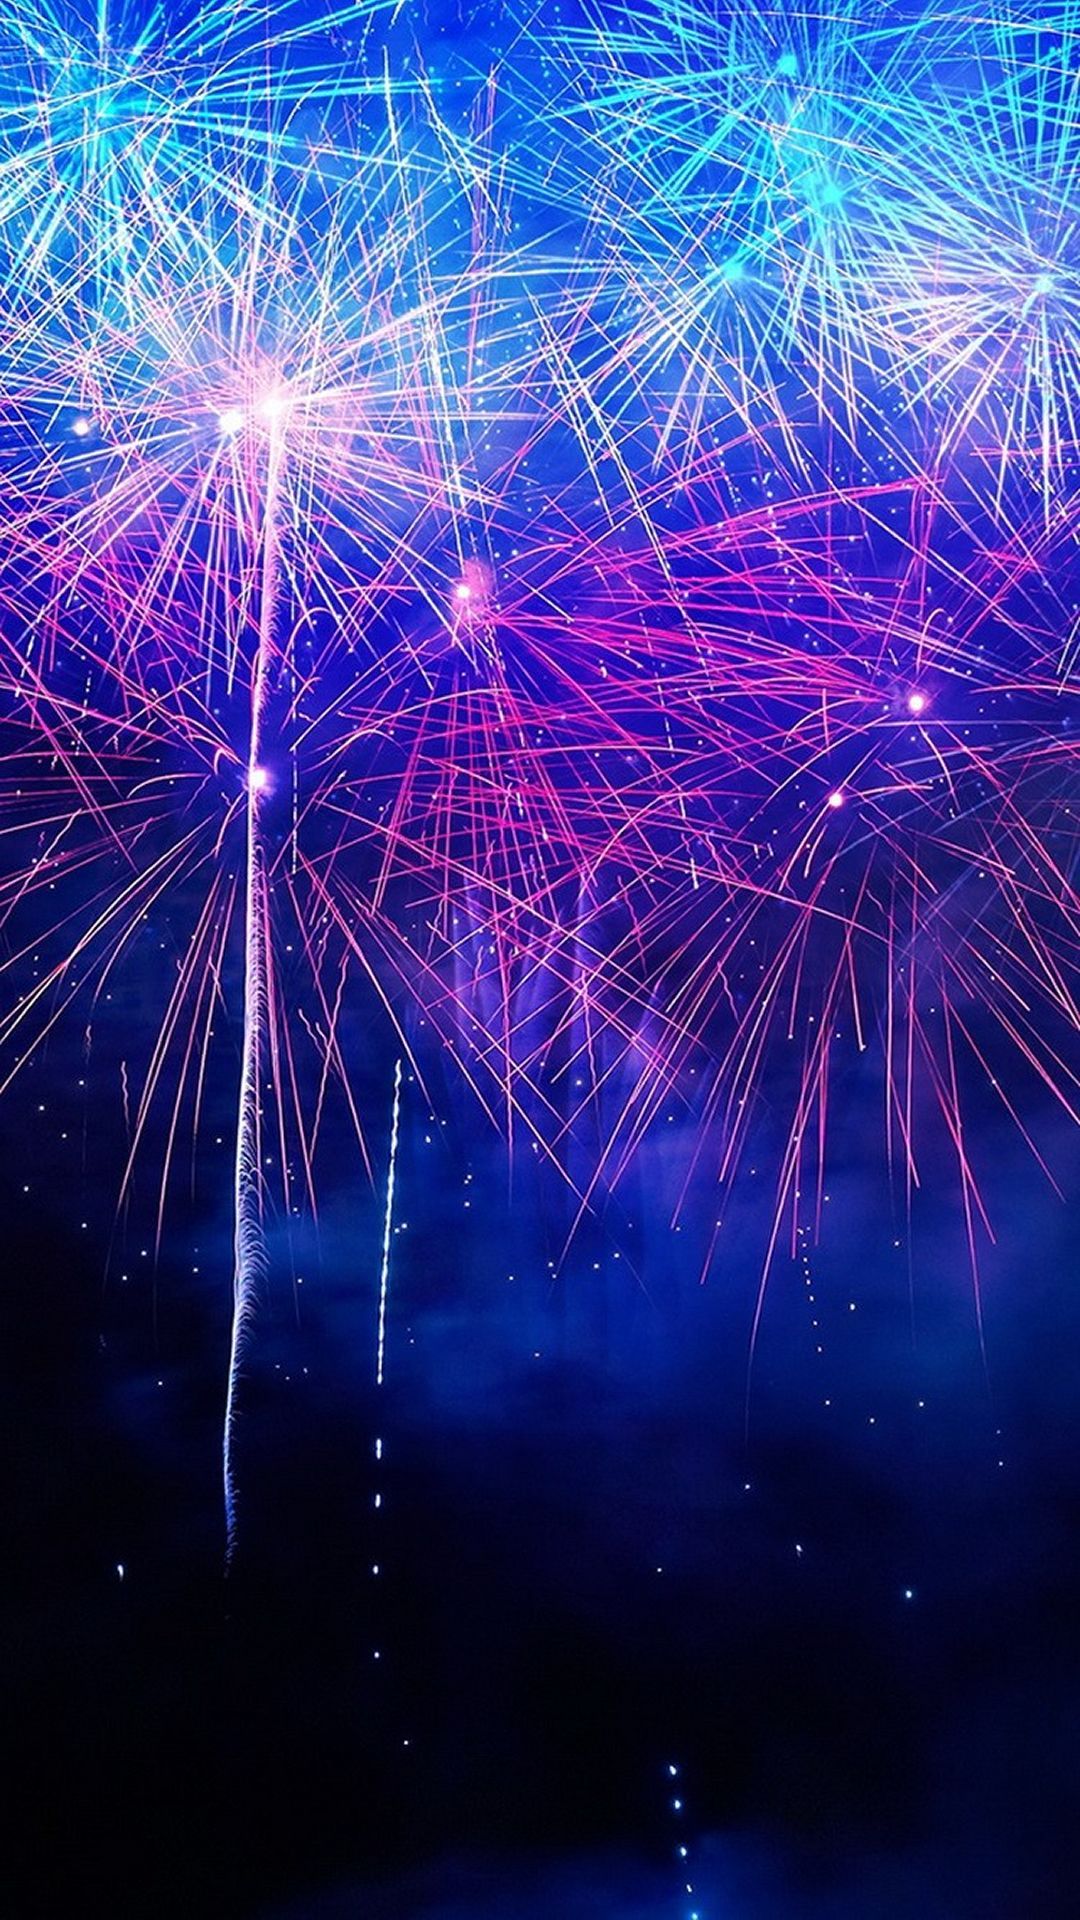 A firework display with bright colors in the sky - New Year